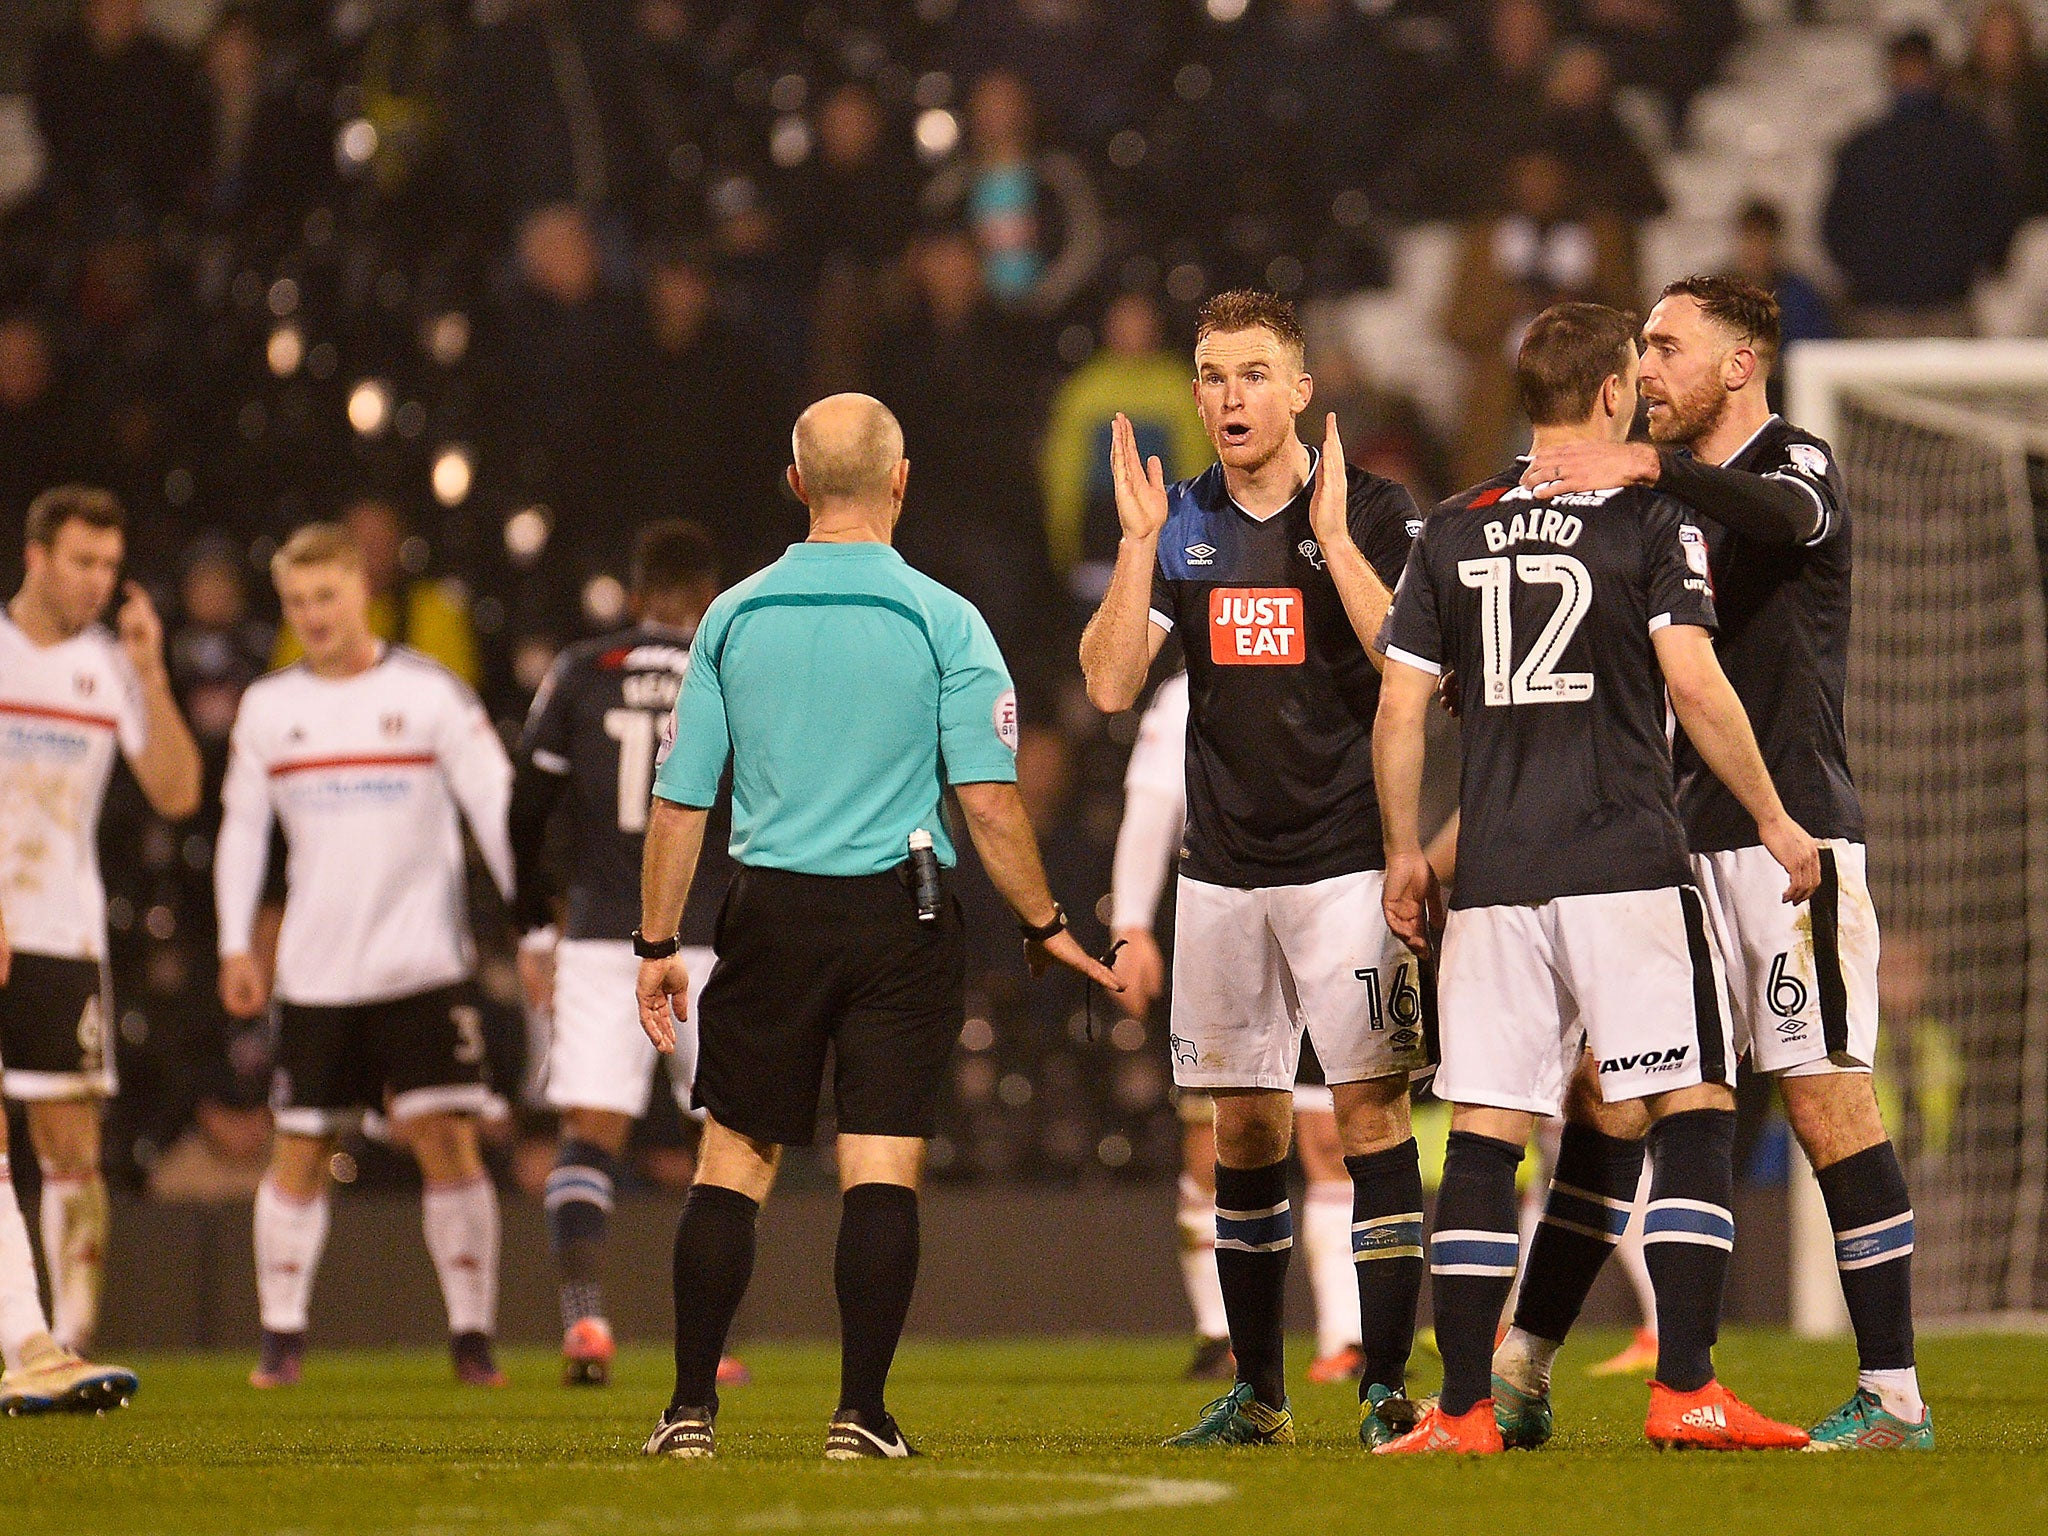 Derby County saw their seven-match winning streak ended in a 2-2 draw with Fulham